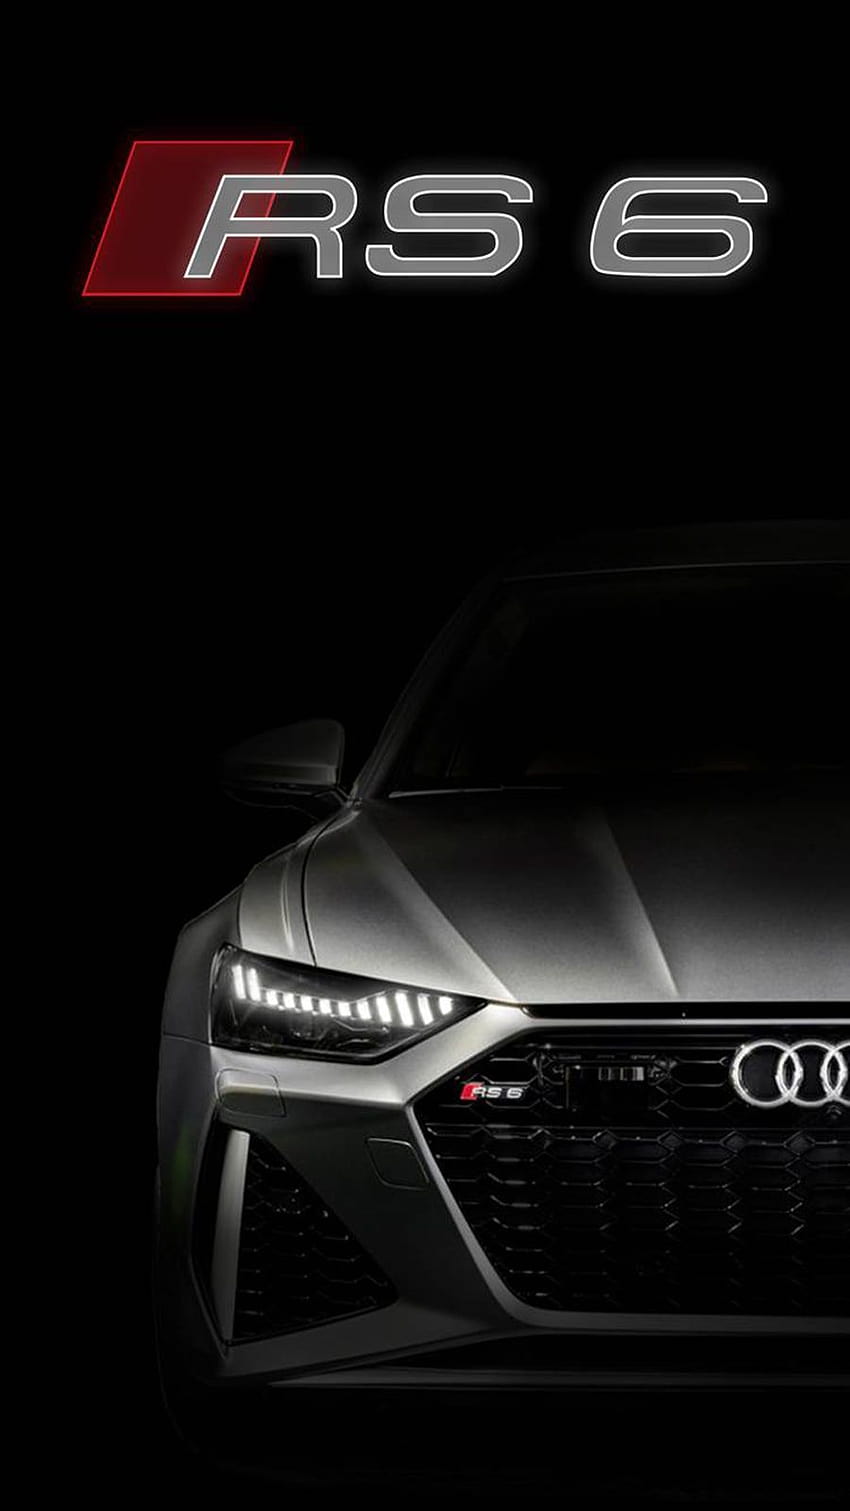 Audi RS6 2020 For Your Device, 아우디 RS6 아이폰 HD 전화 배경 화면